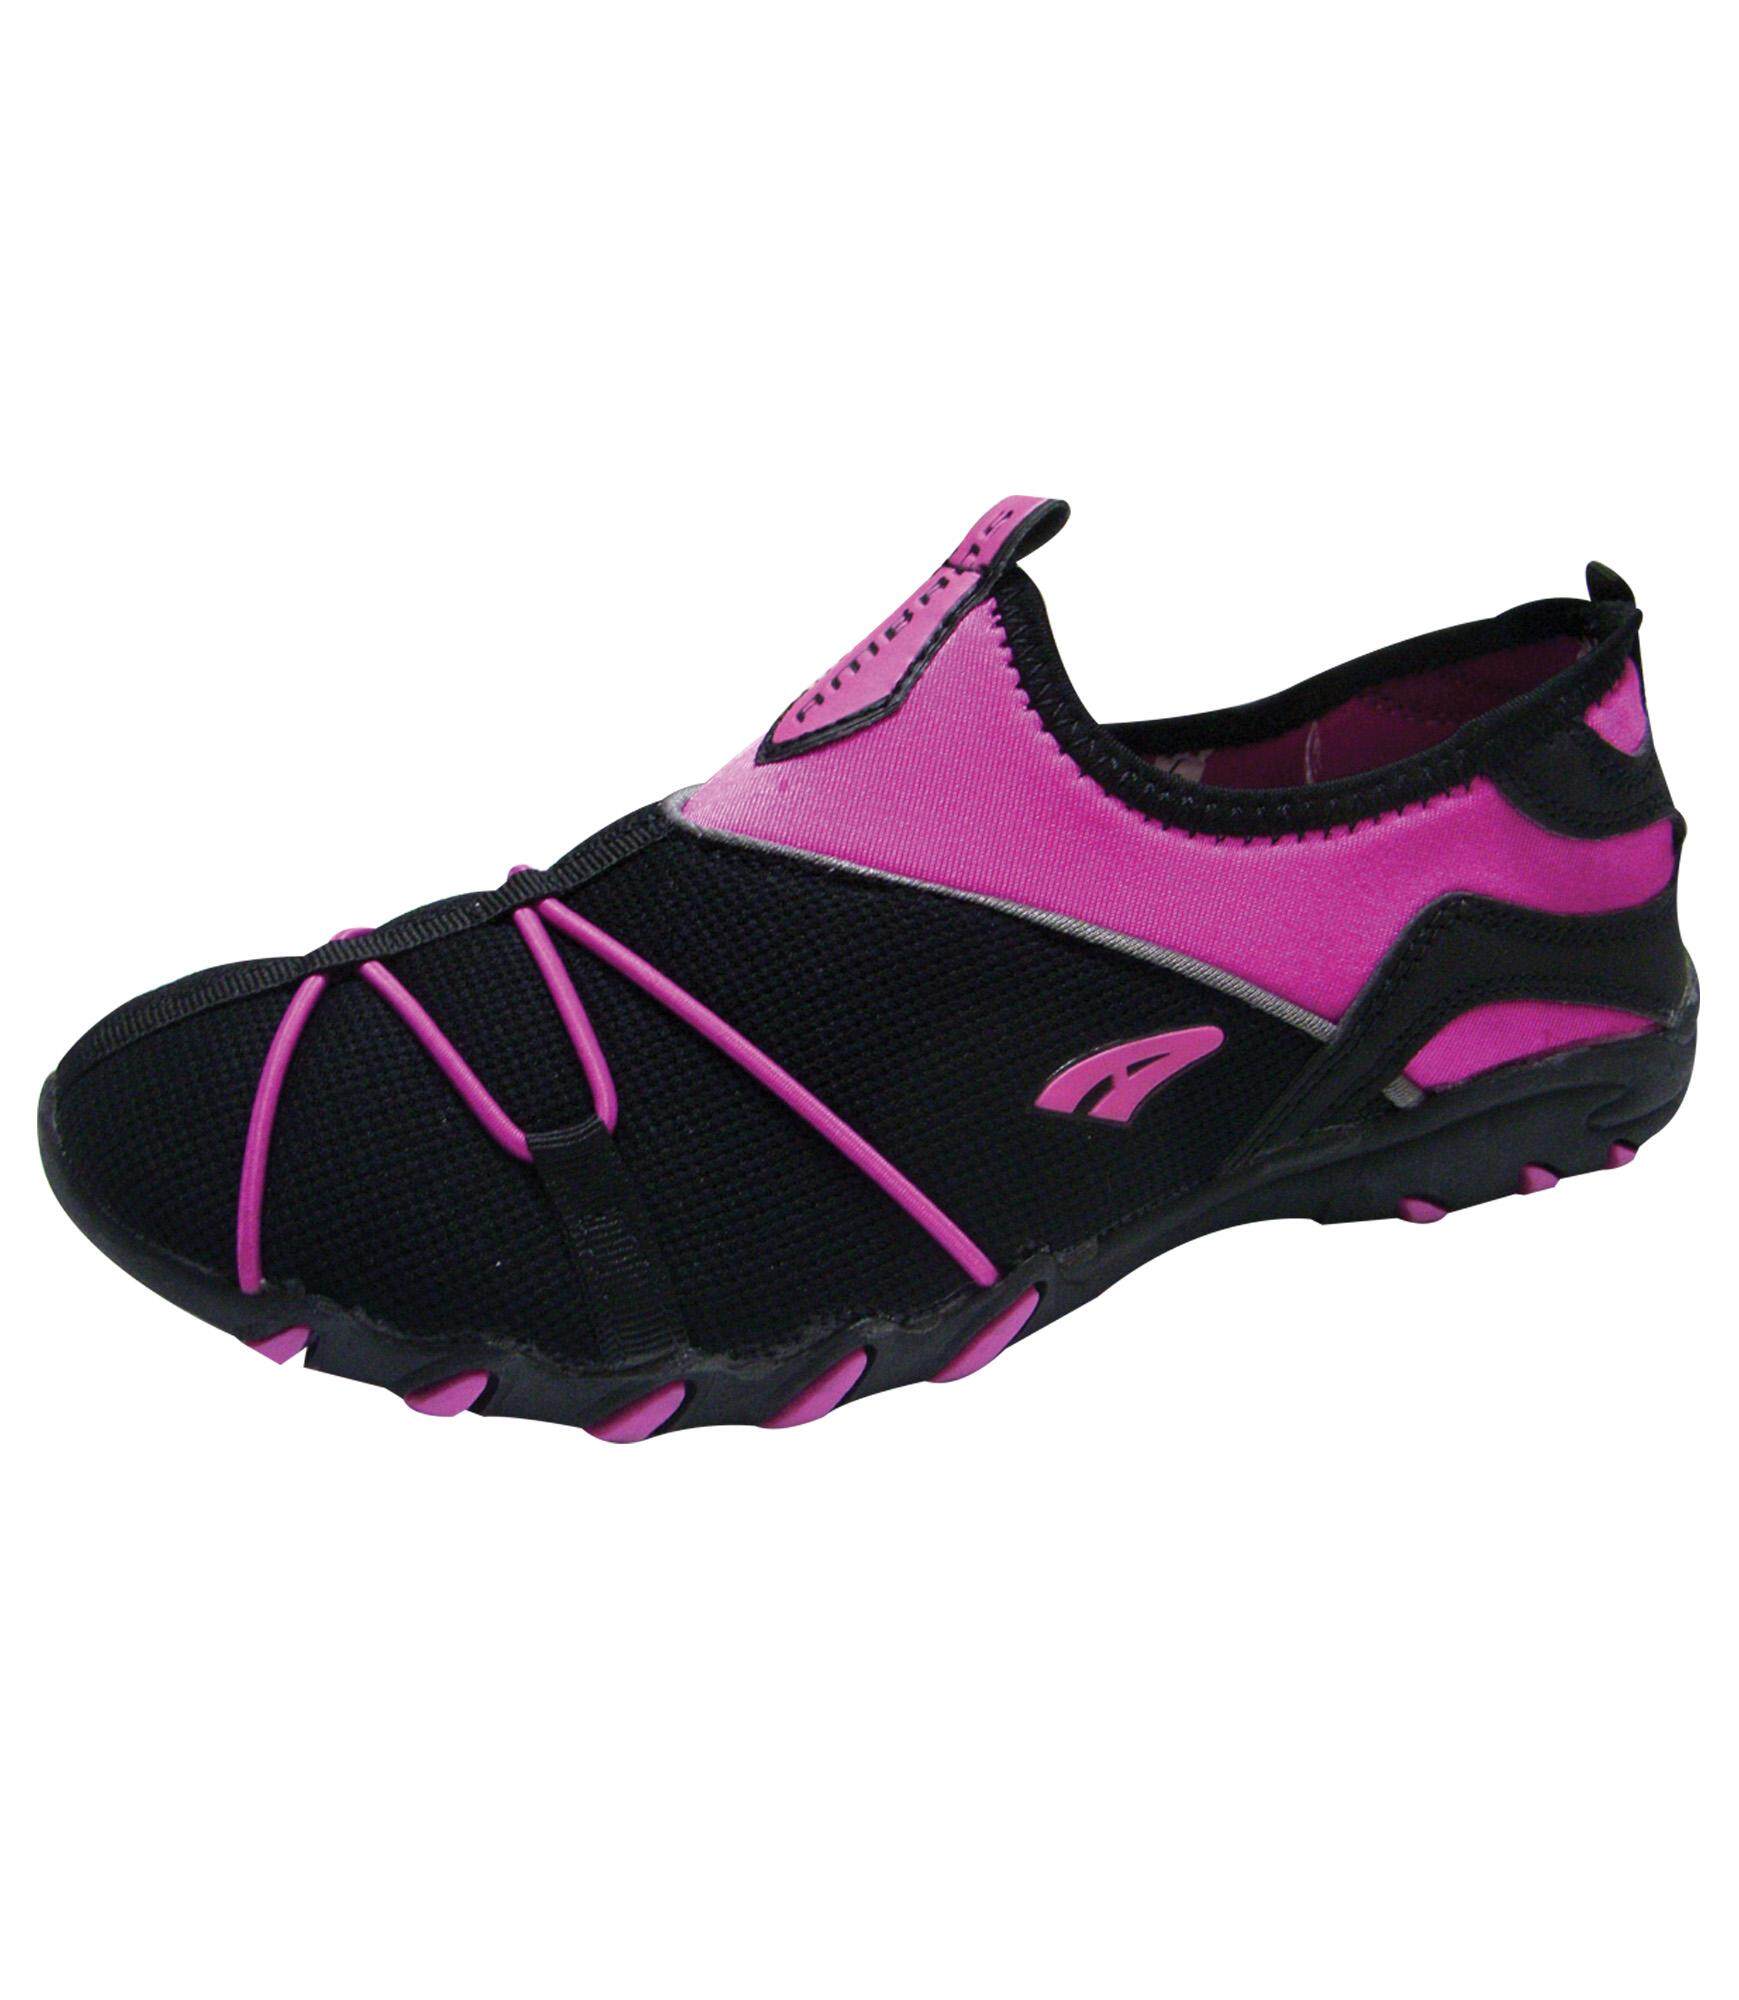 Ambros Expose Women's Walking Casual Adventure Shoes